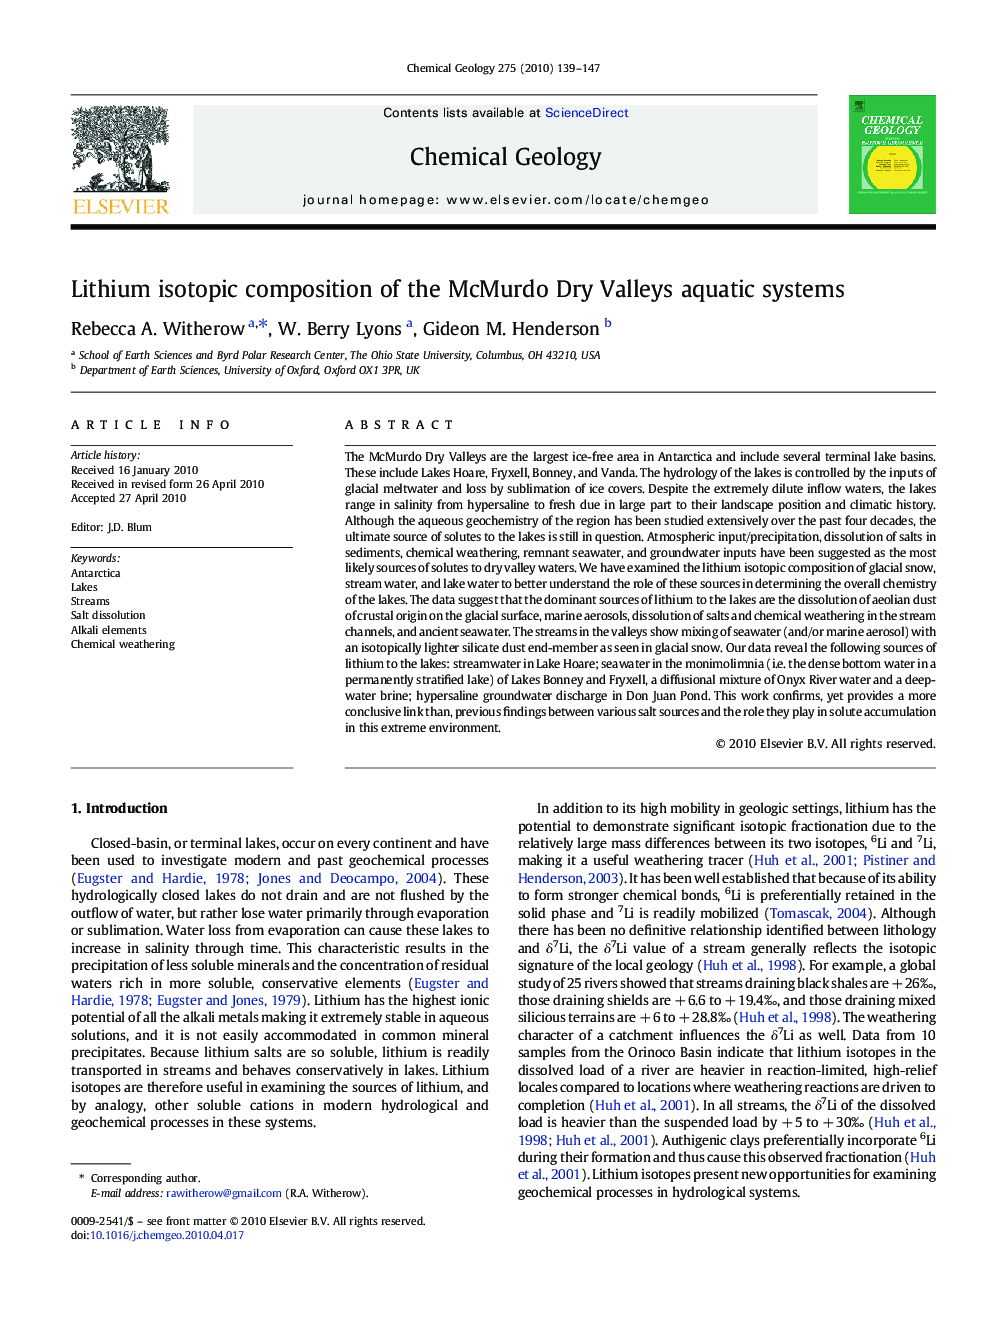 Lithium isotopic composition of the McMurdo Dry Valleys aquatic systems